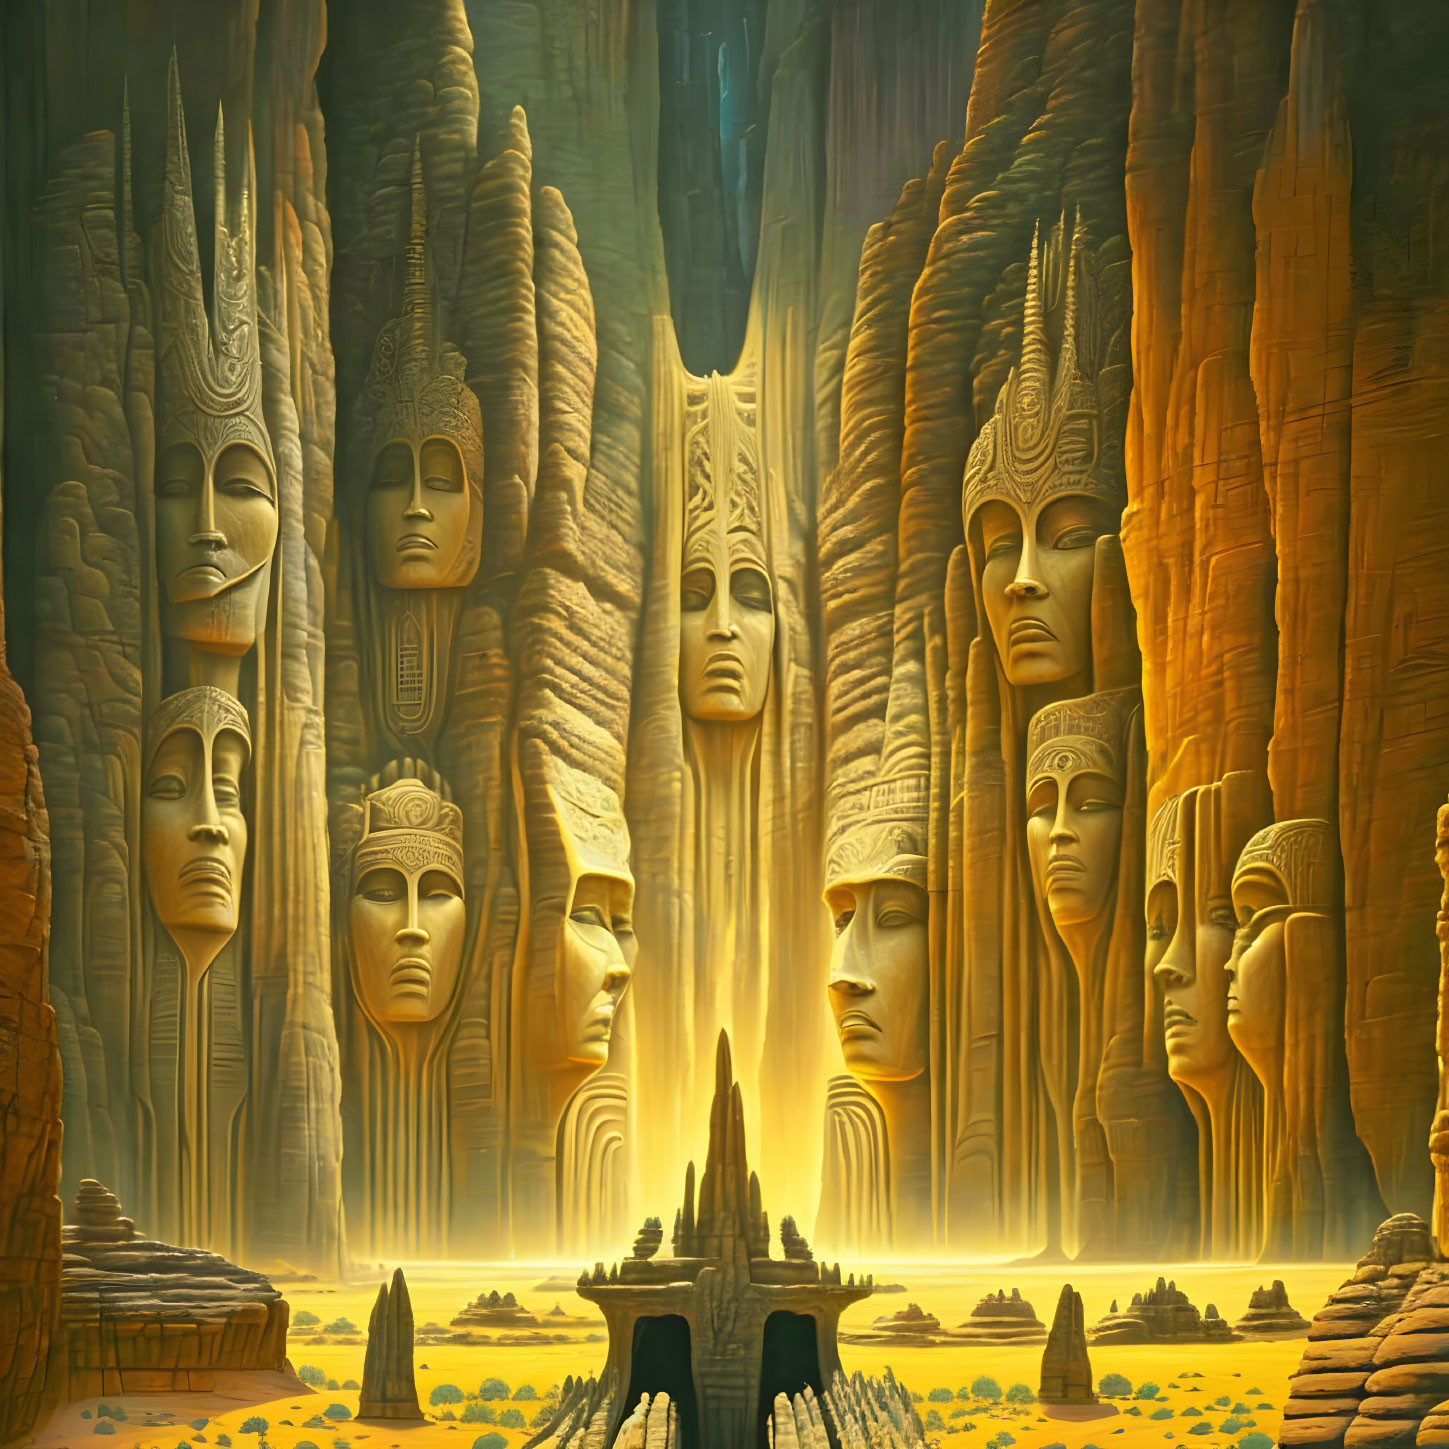 The Golden Valley of Kings